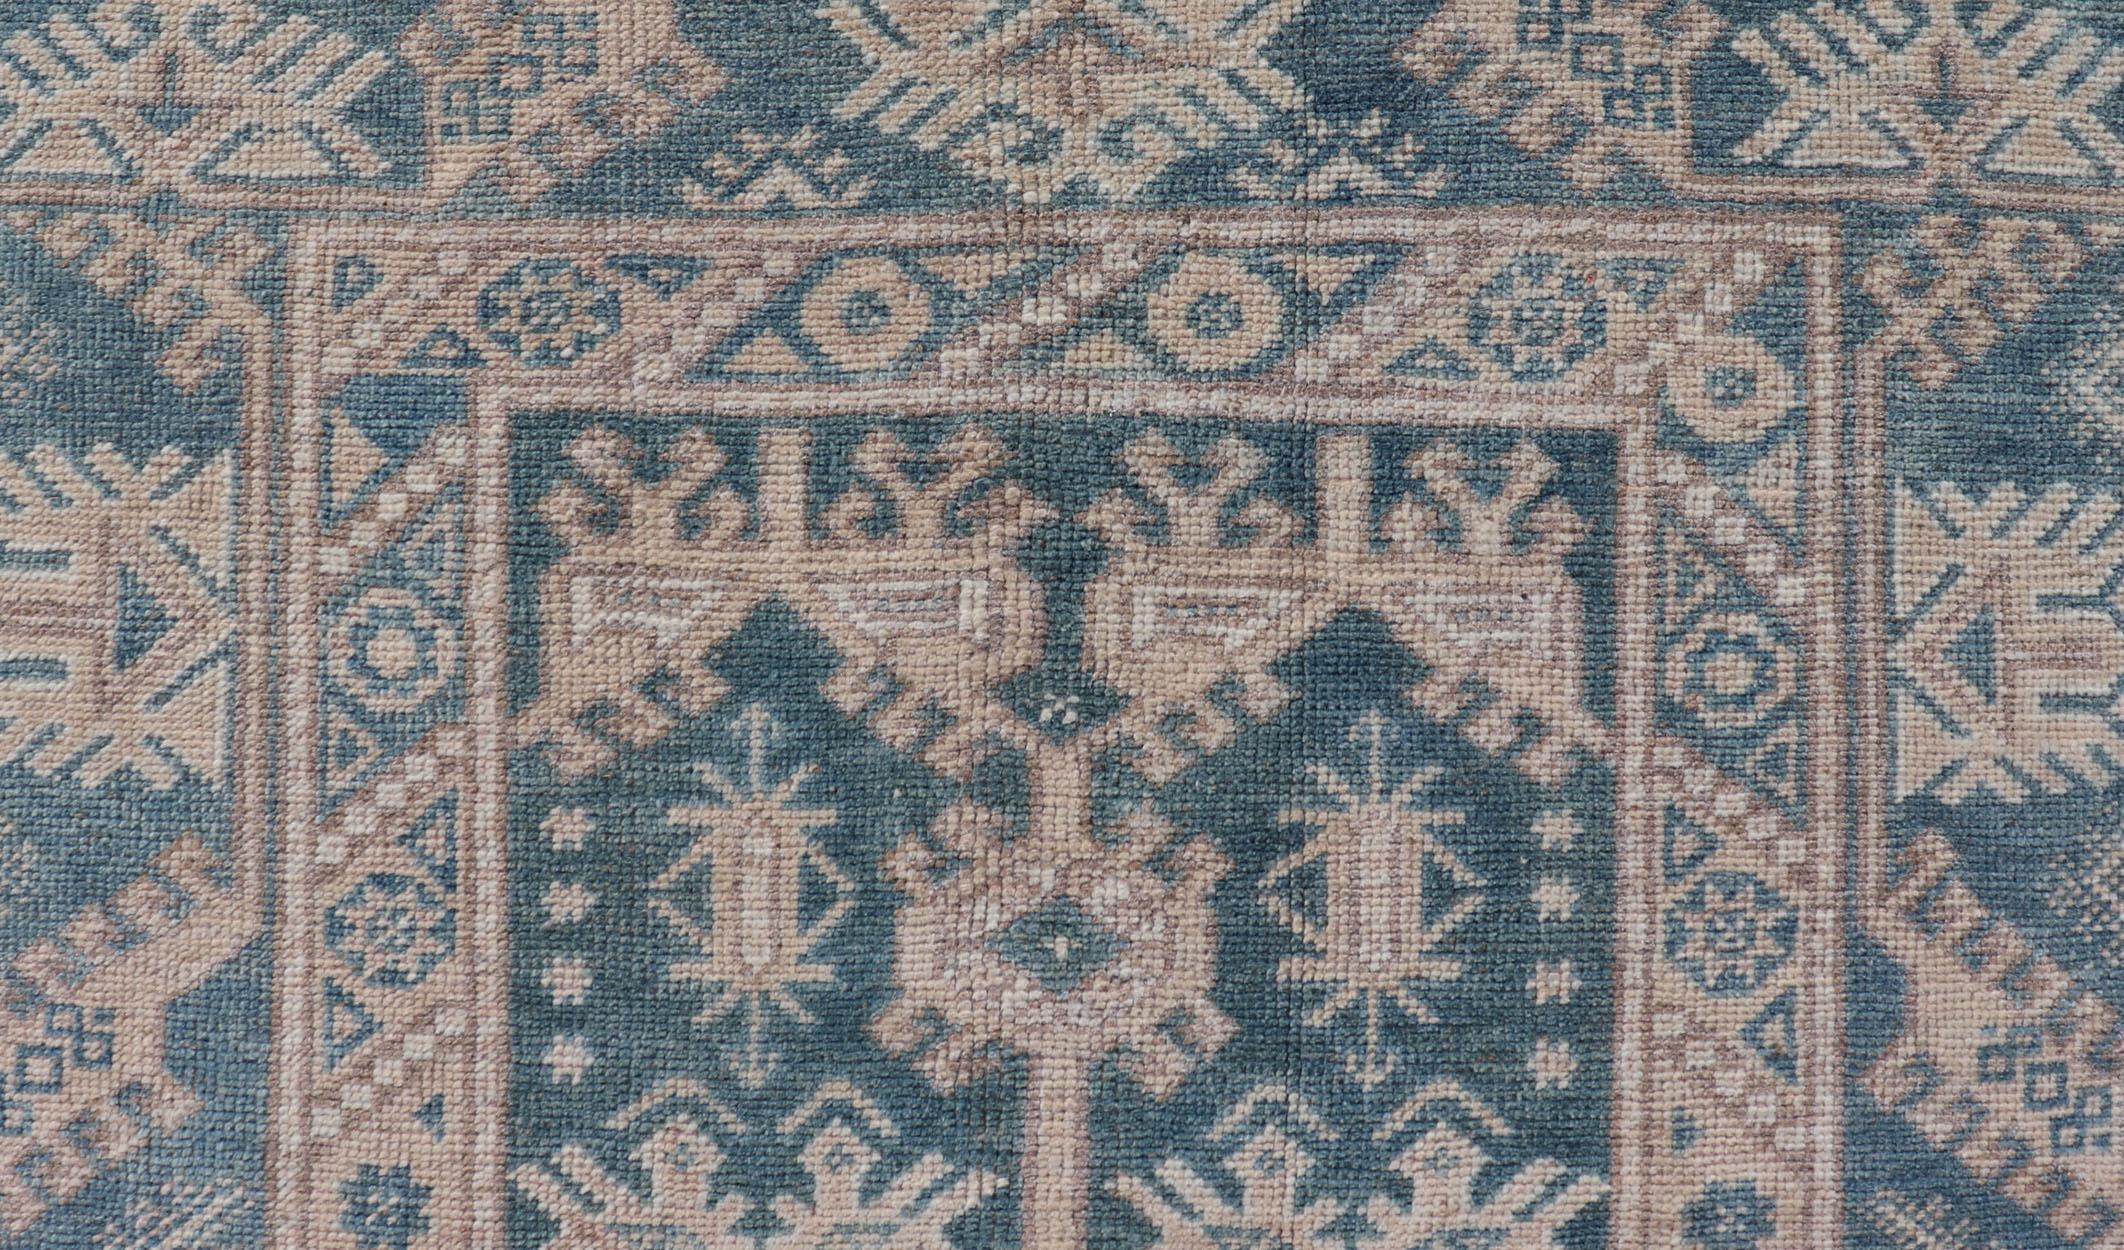 Blue and Cream Turkish Oushak Rug Vintage with All-Over Motif Design For Sale 5